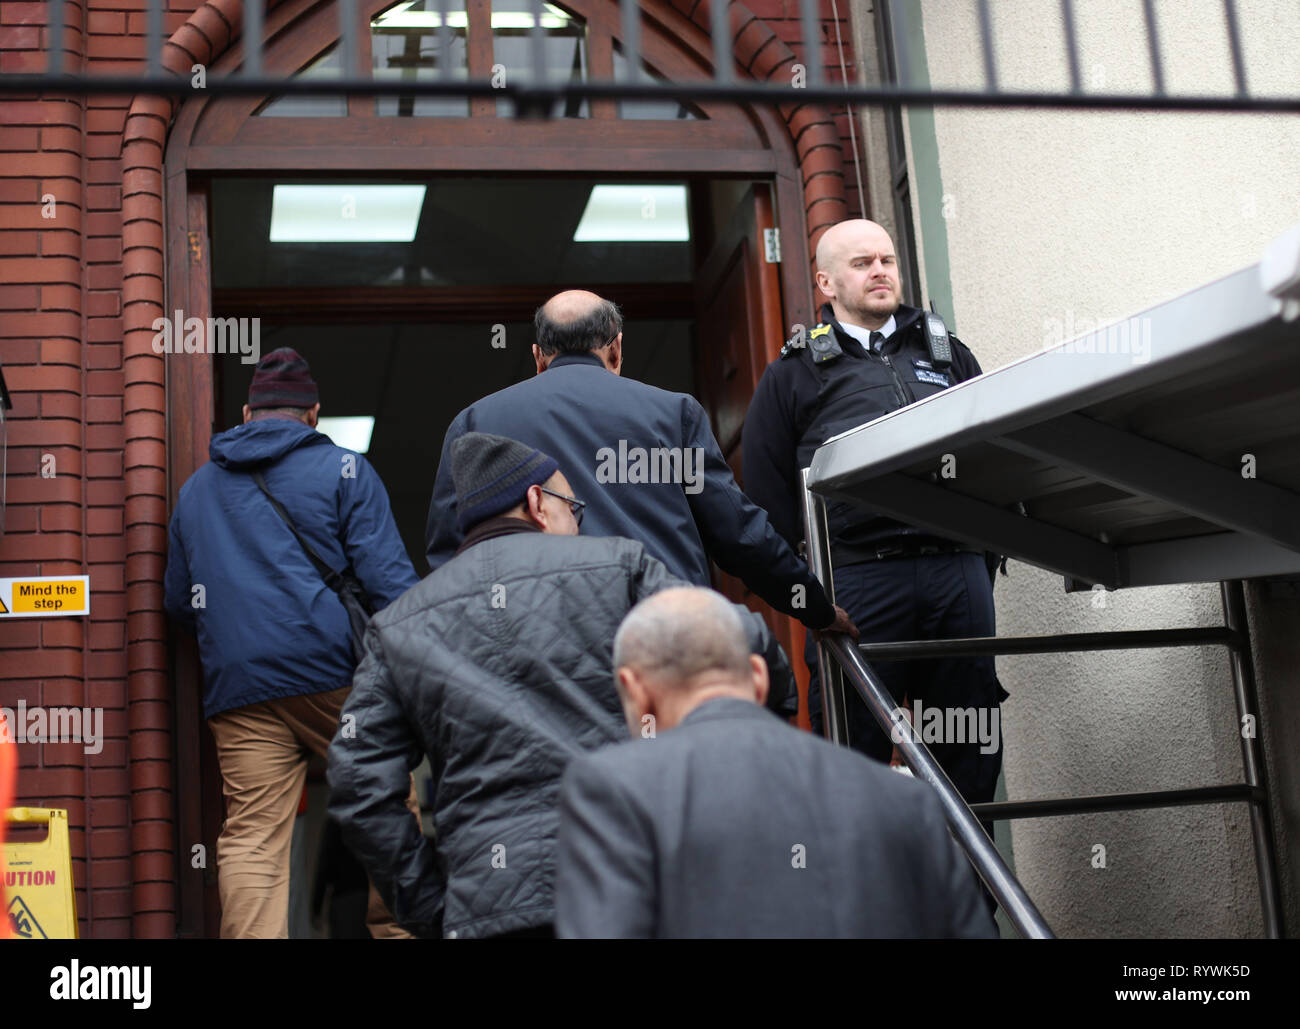 A police officer stands outside Finsbury Park Mosque in London, following the Christchurch mosque attacks in New Zealand, as worshipers begin to arrive for the Friday prayer service. Stock Photo